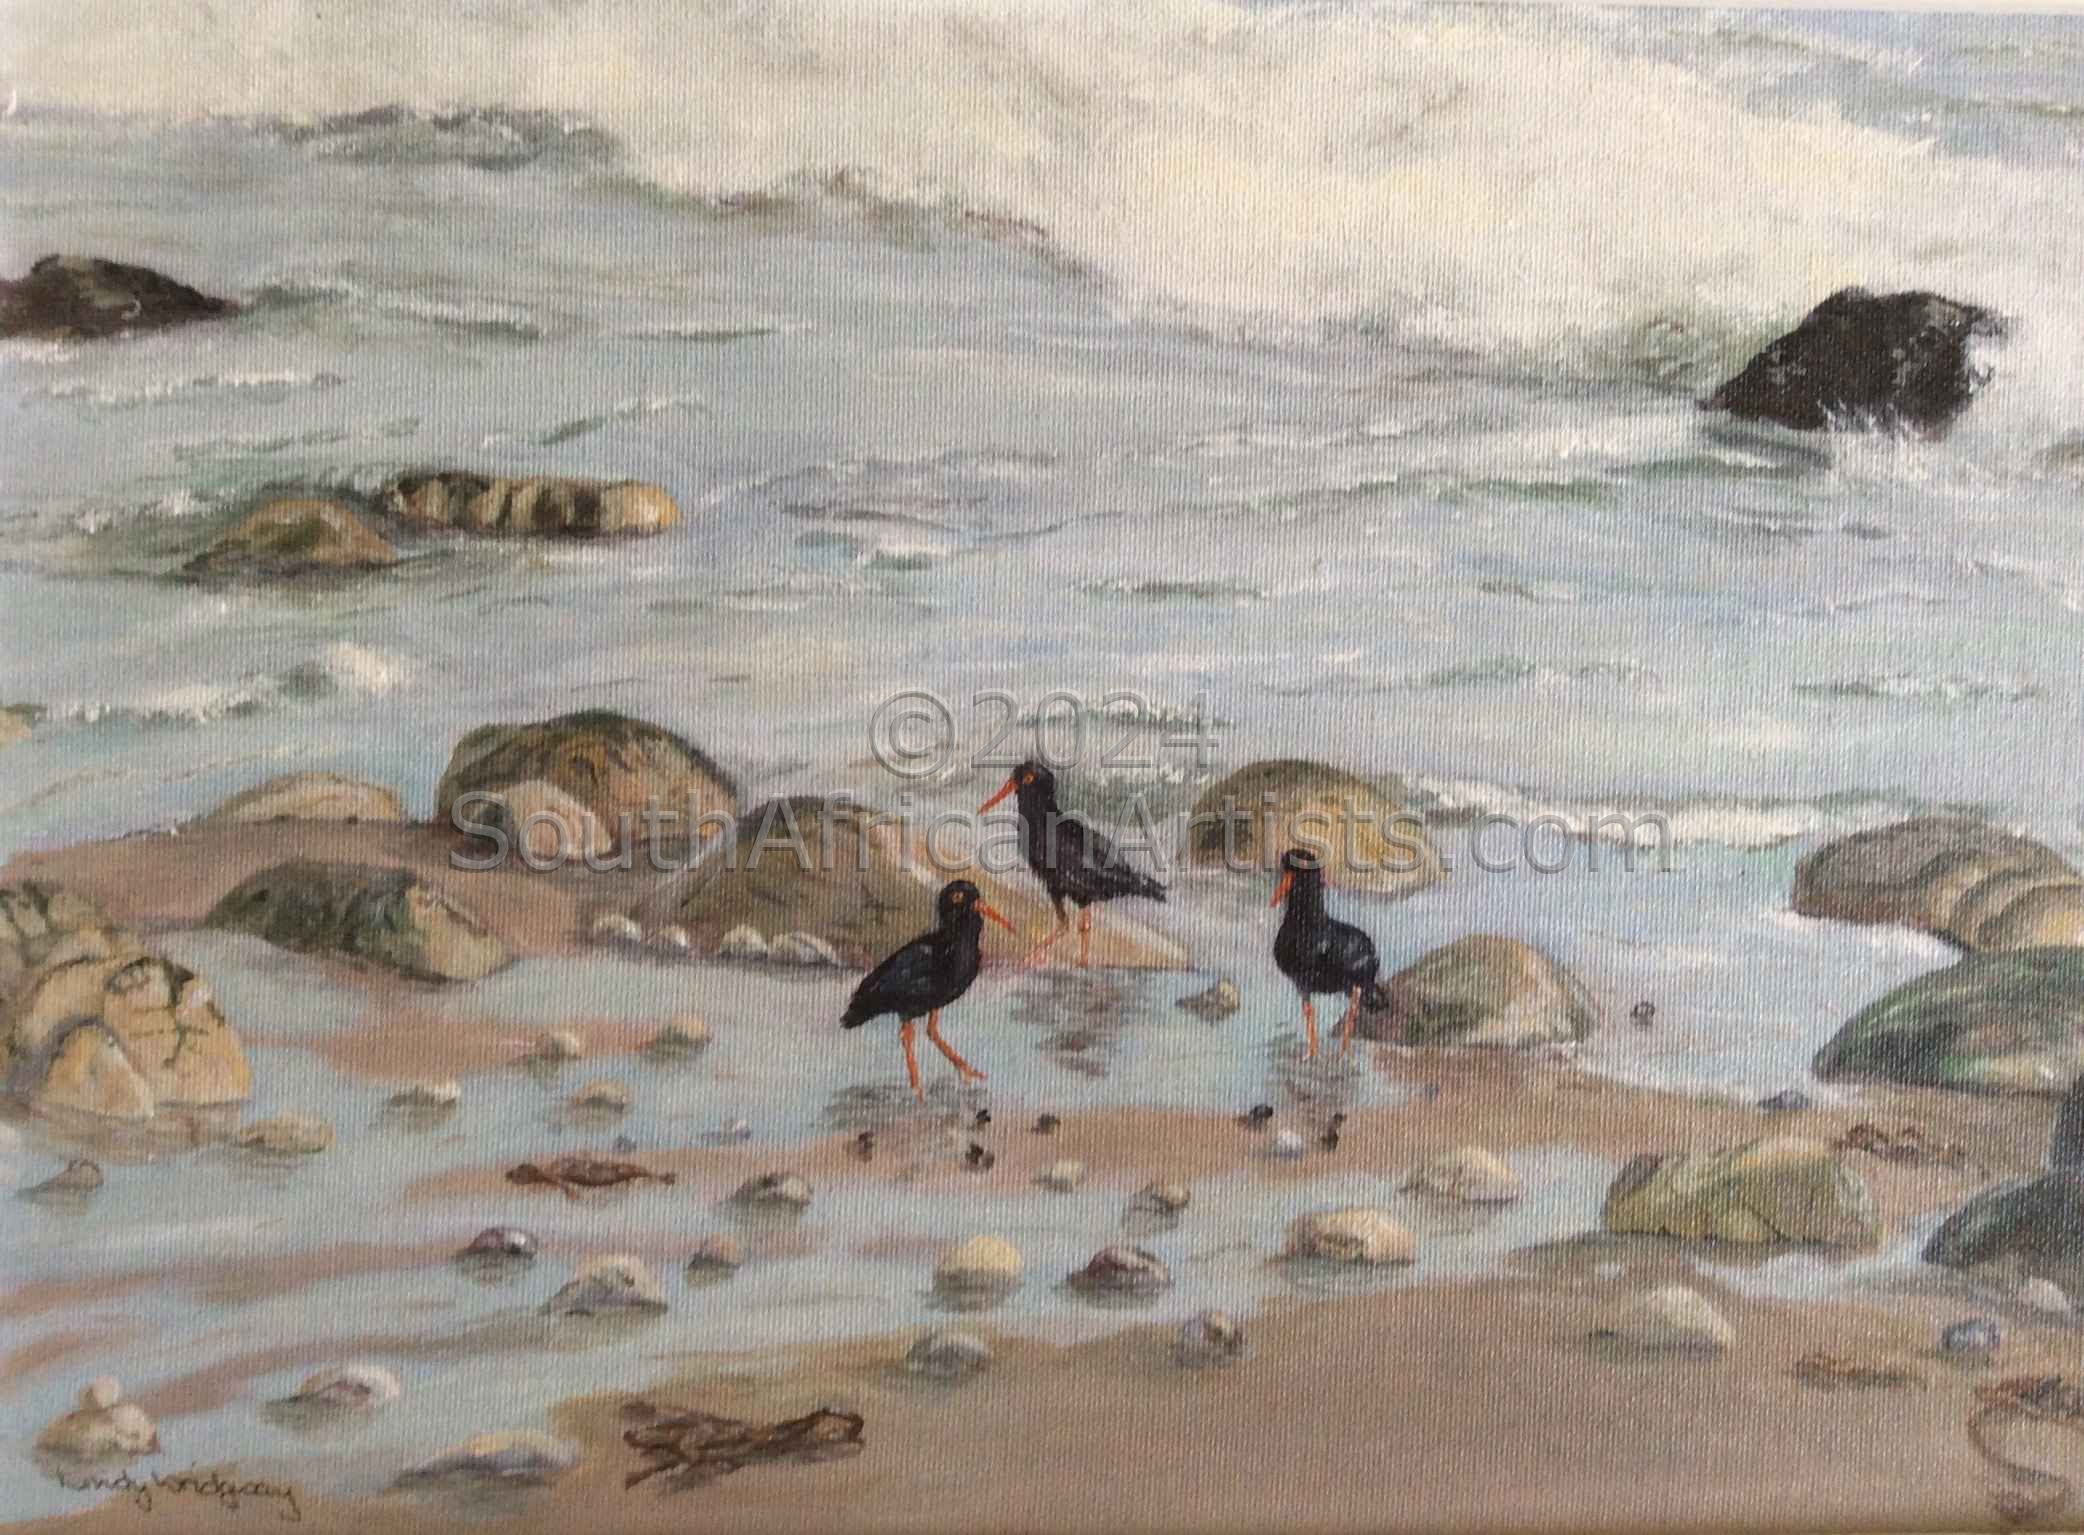 Oyster Catchers